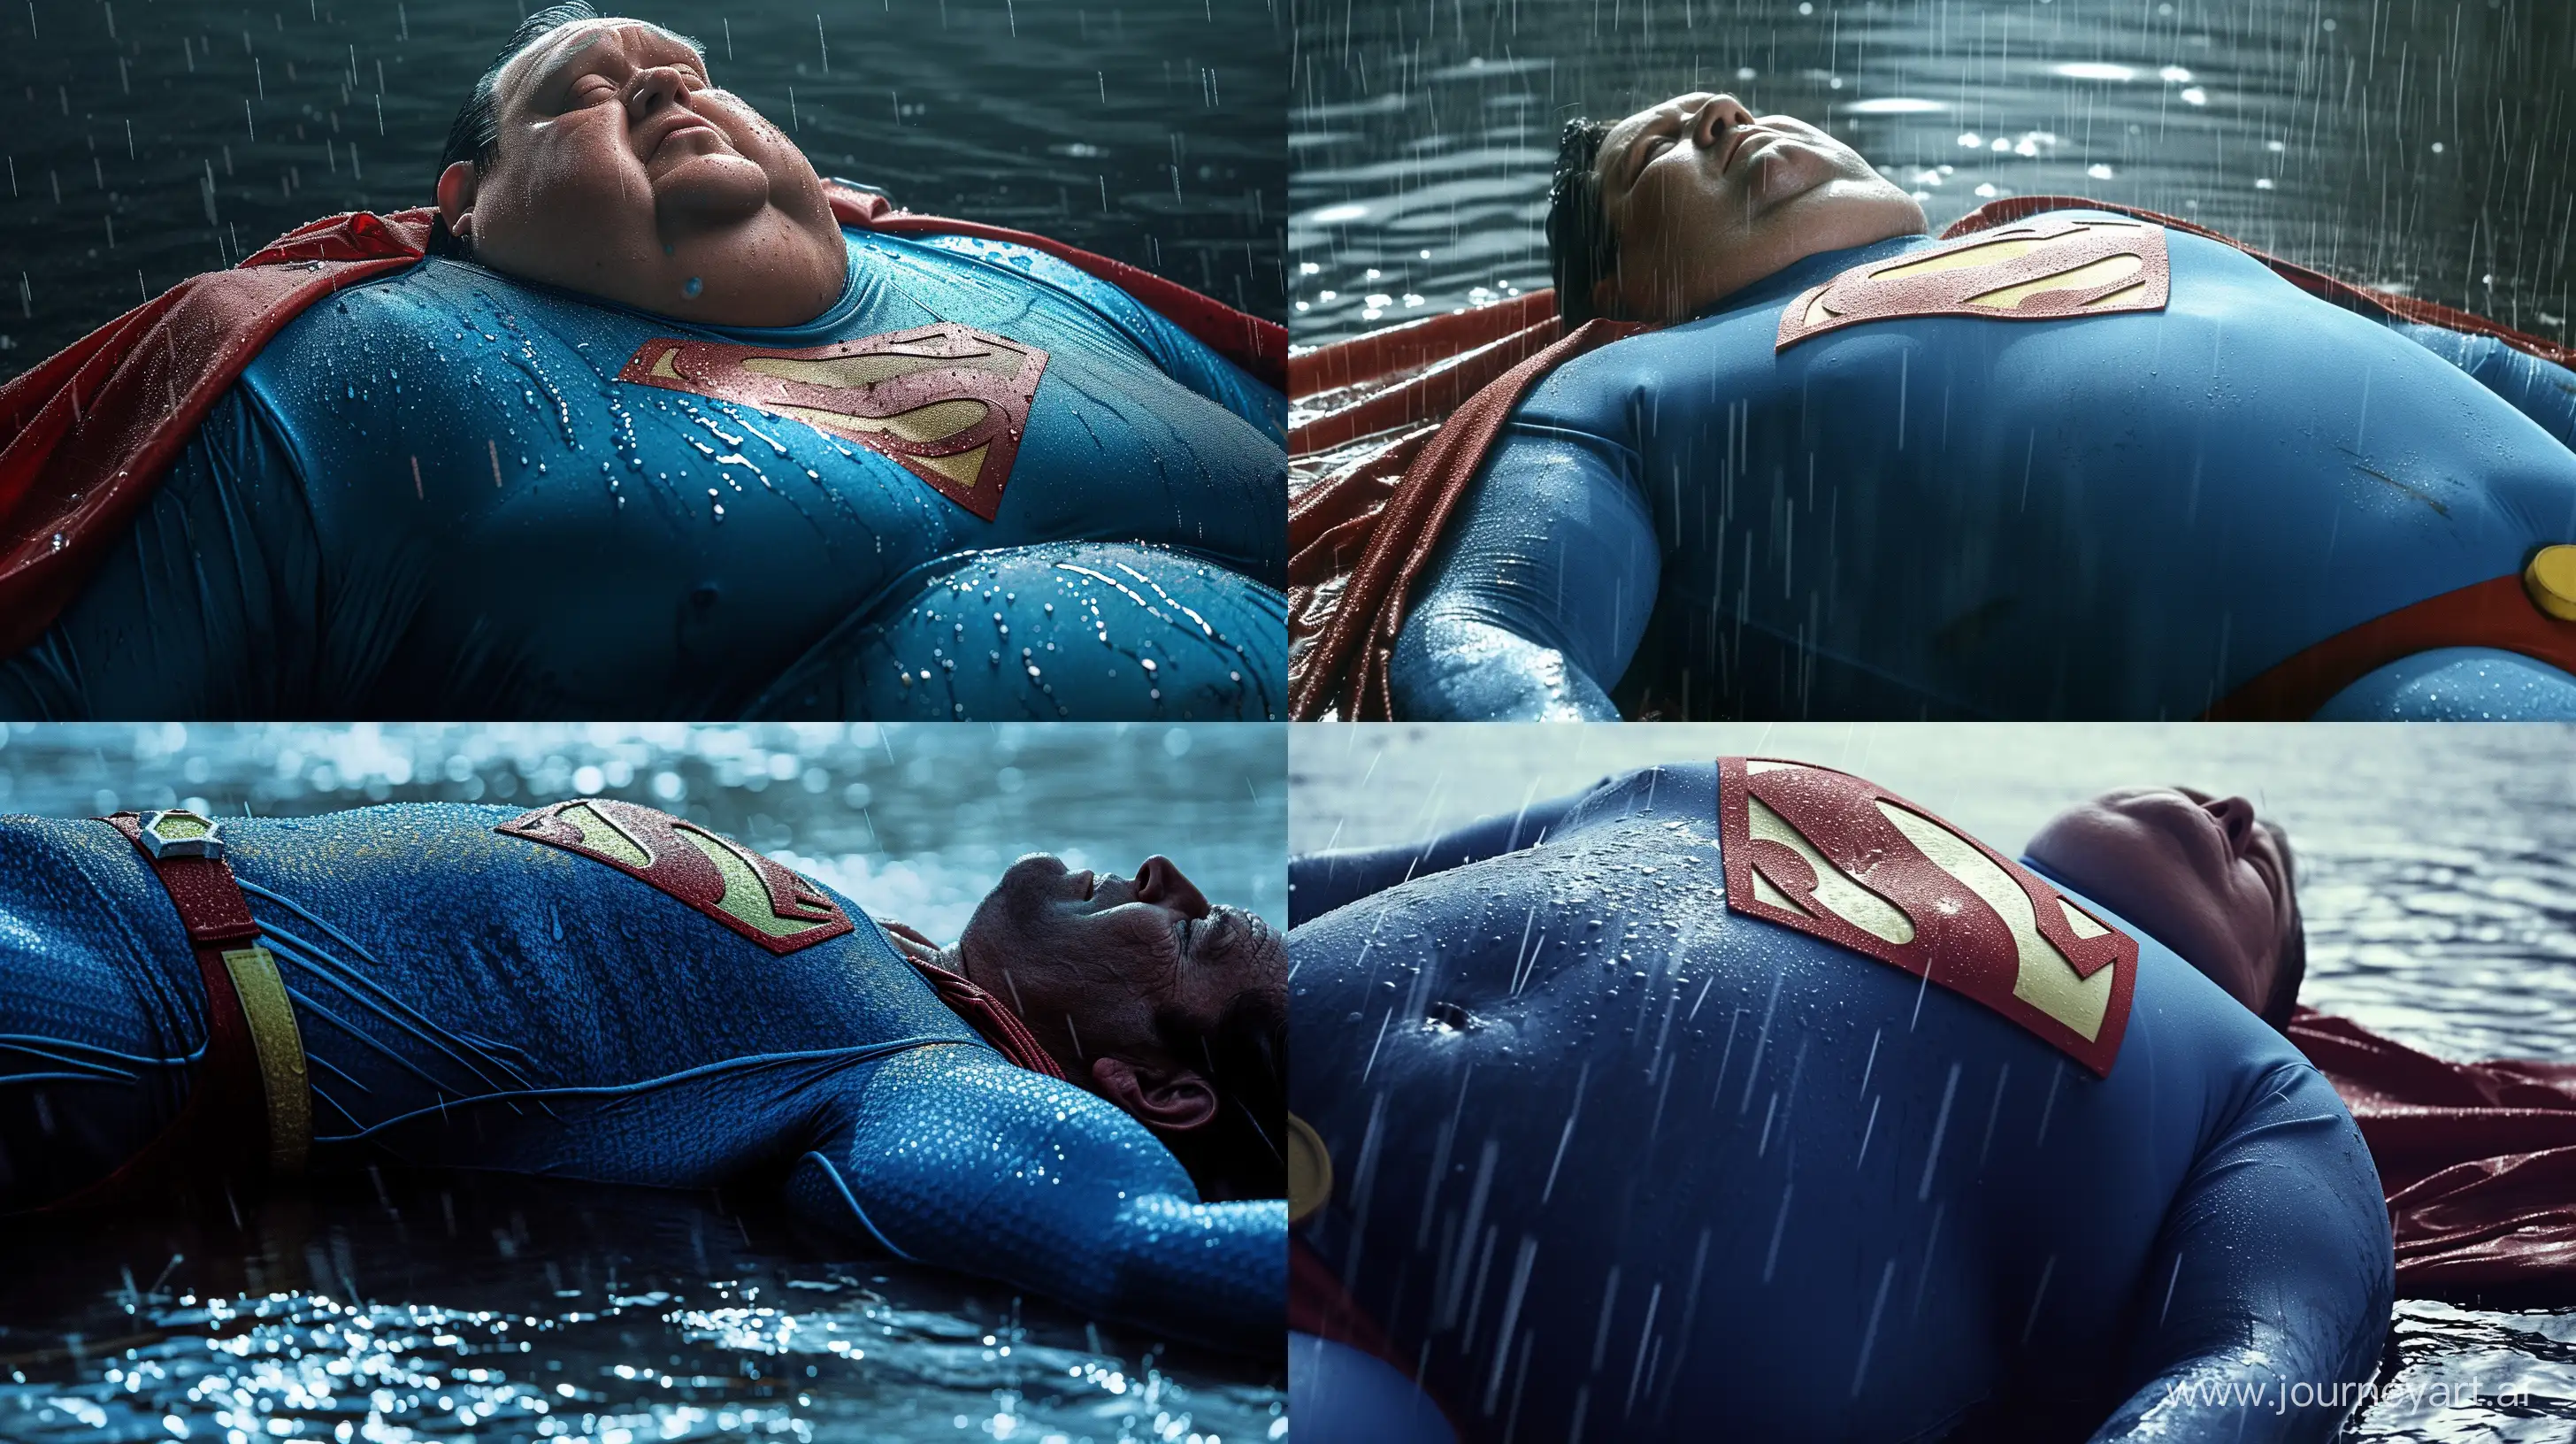 Elderly-Superman-Enjoys-Rain-by-the-River-in-Iconic-1978-Costume